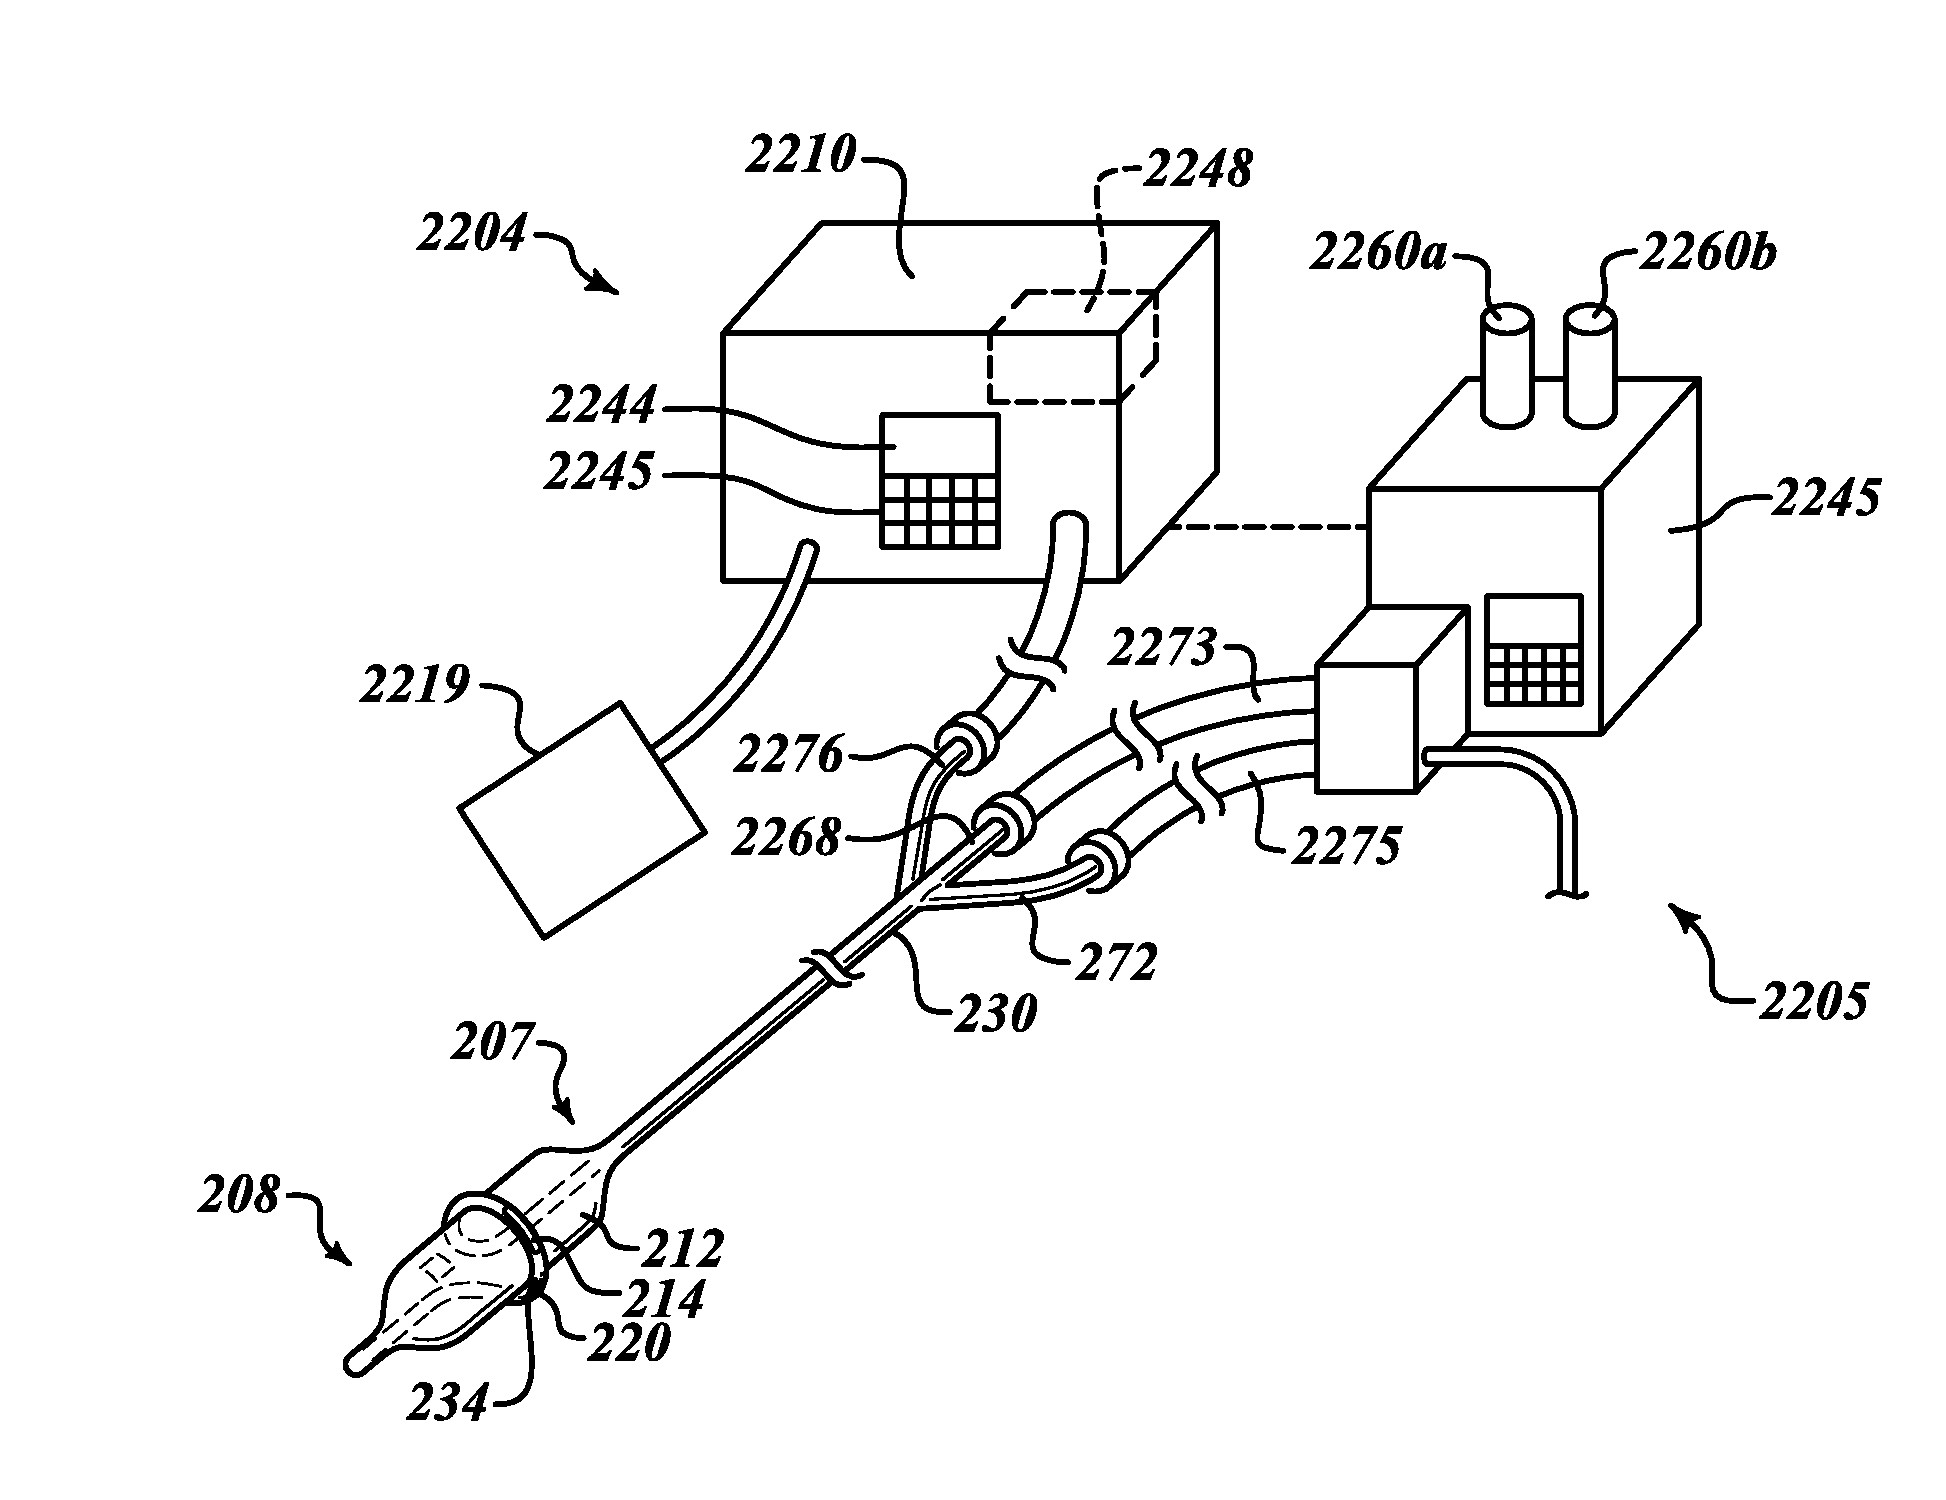 Apparatus for injuring nerve tissue